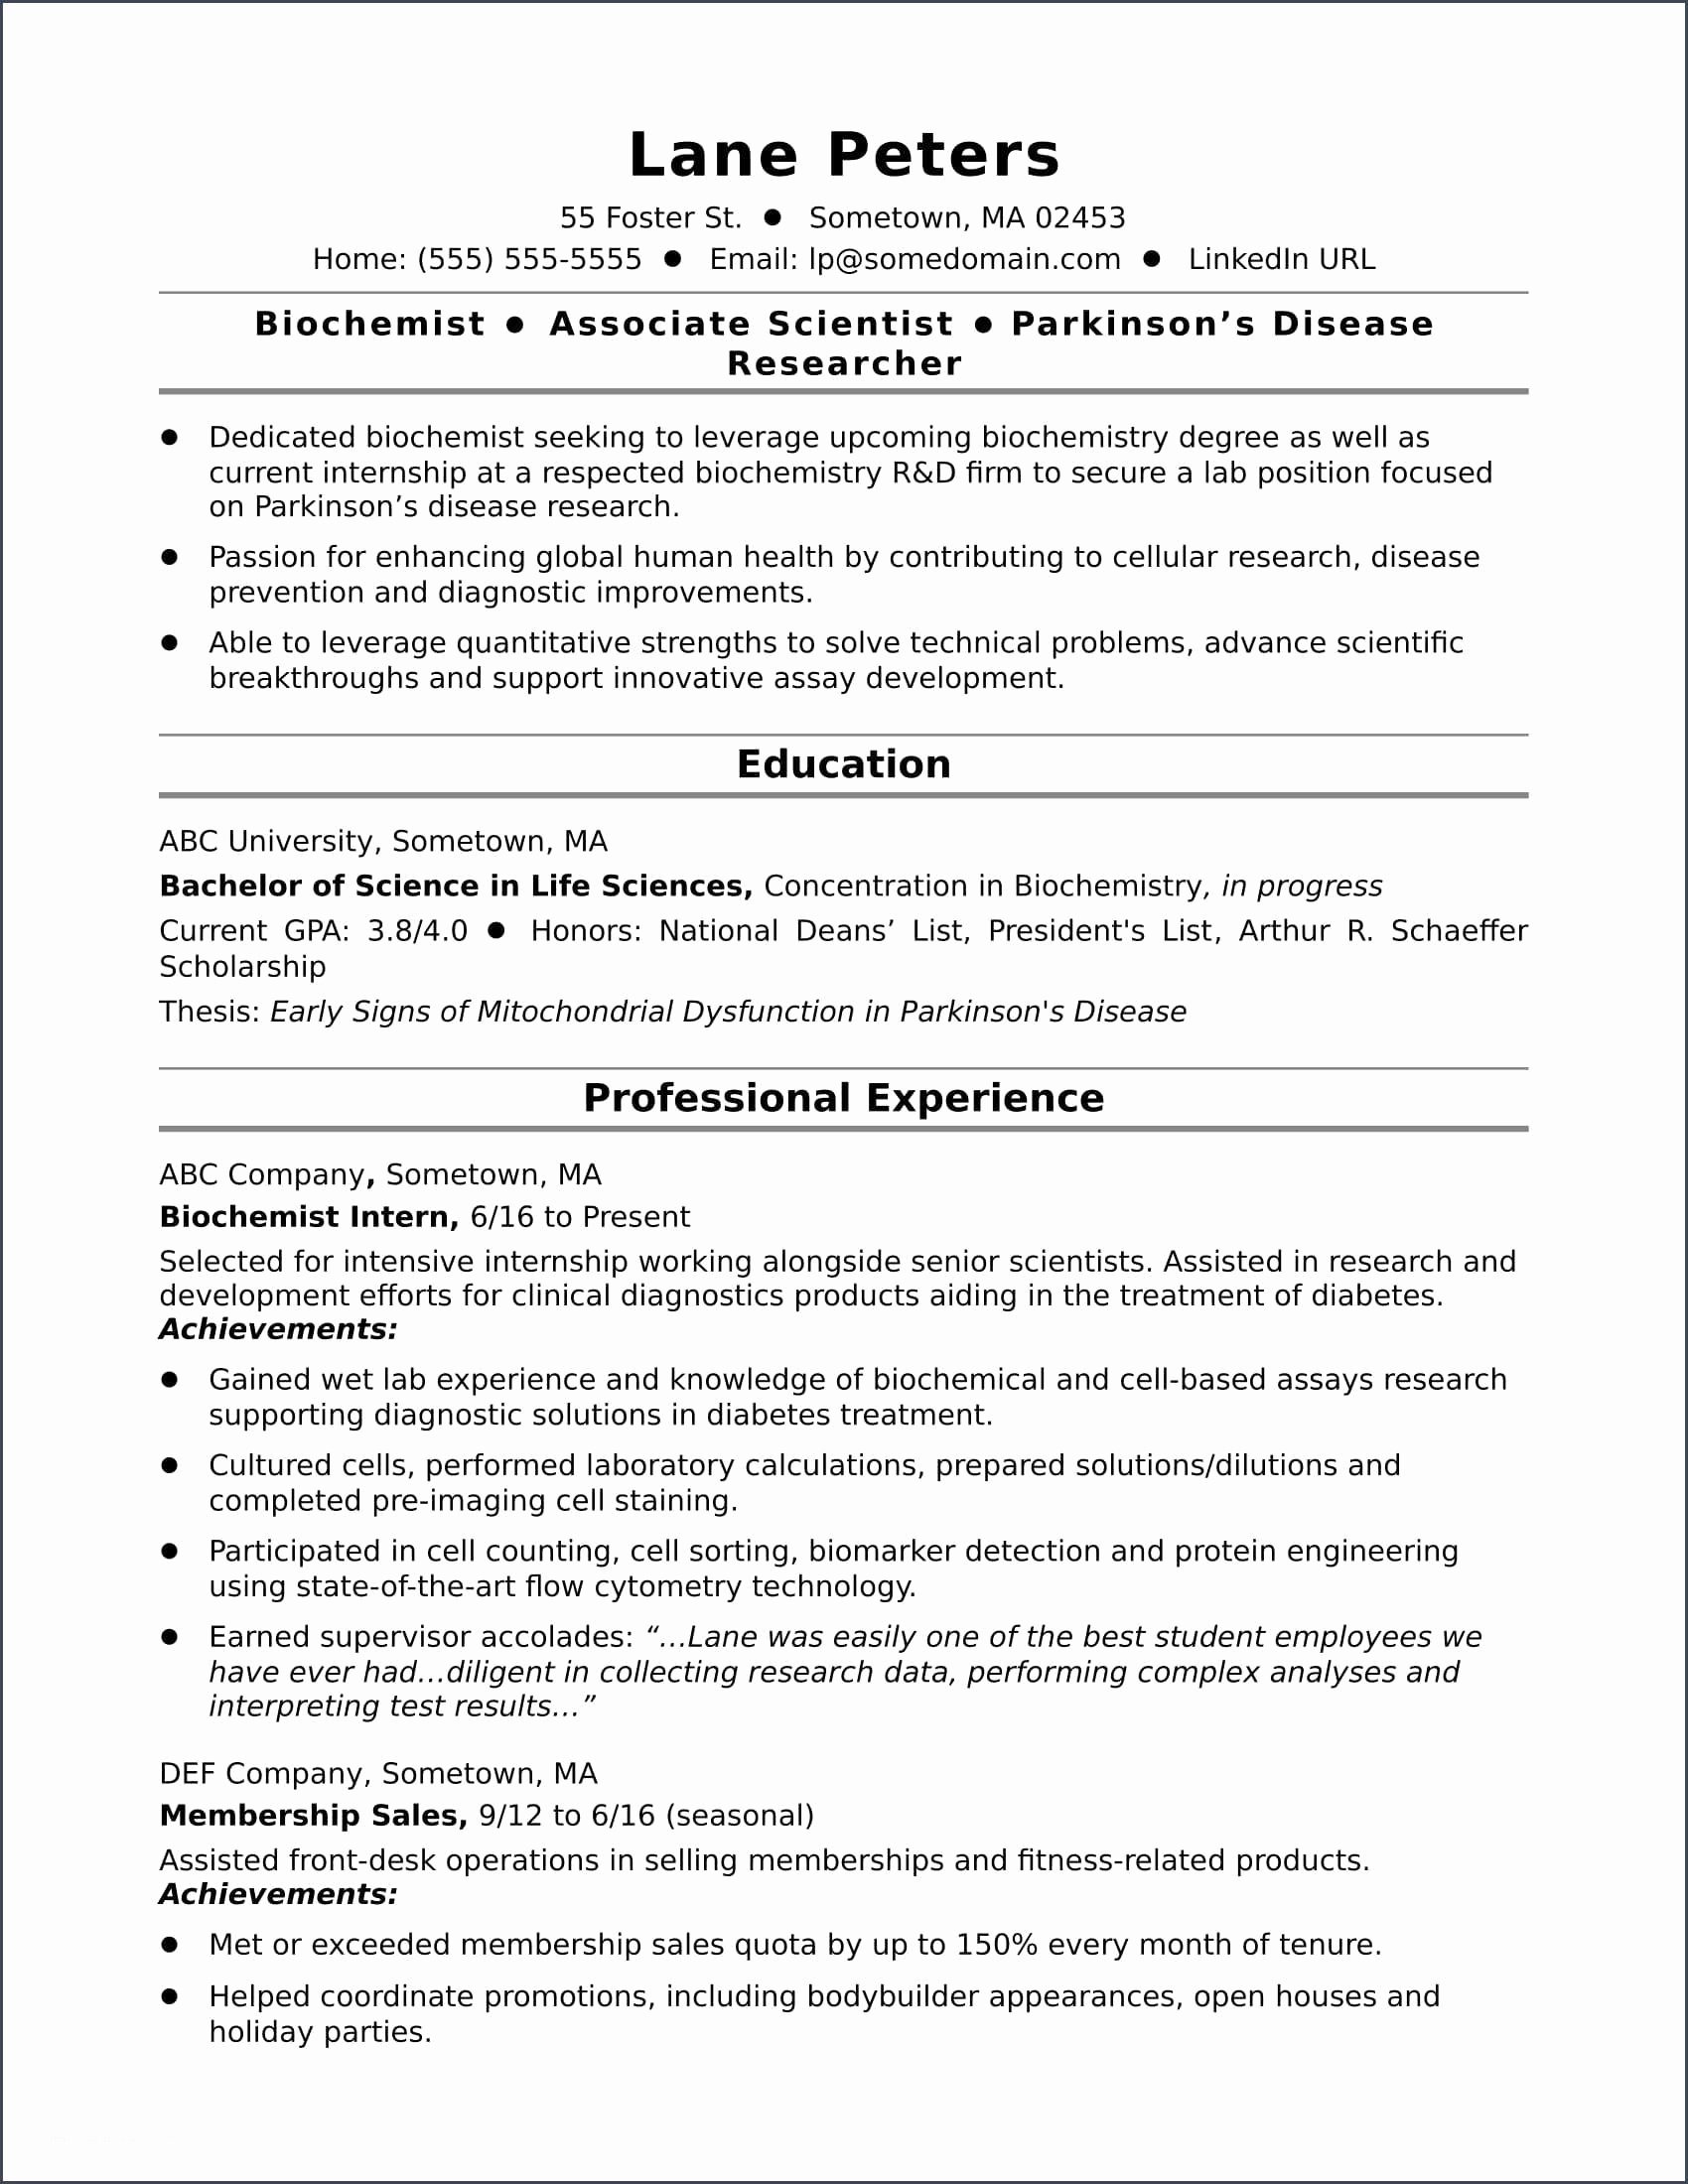 Resume for Entry Level and Entry Level Accounting Resume